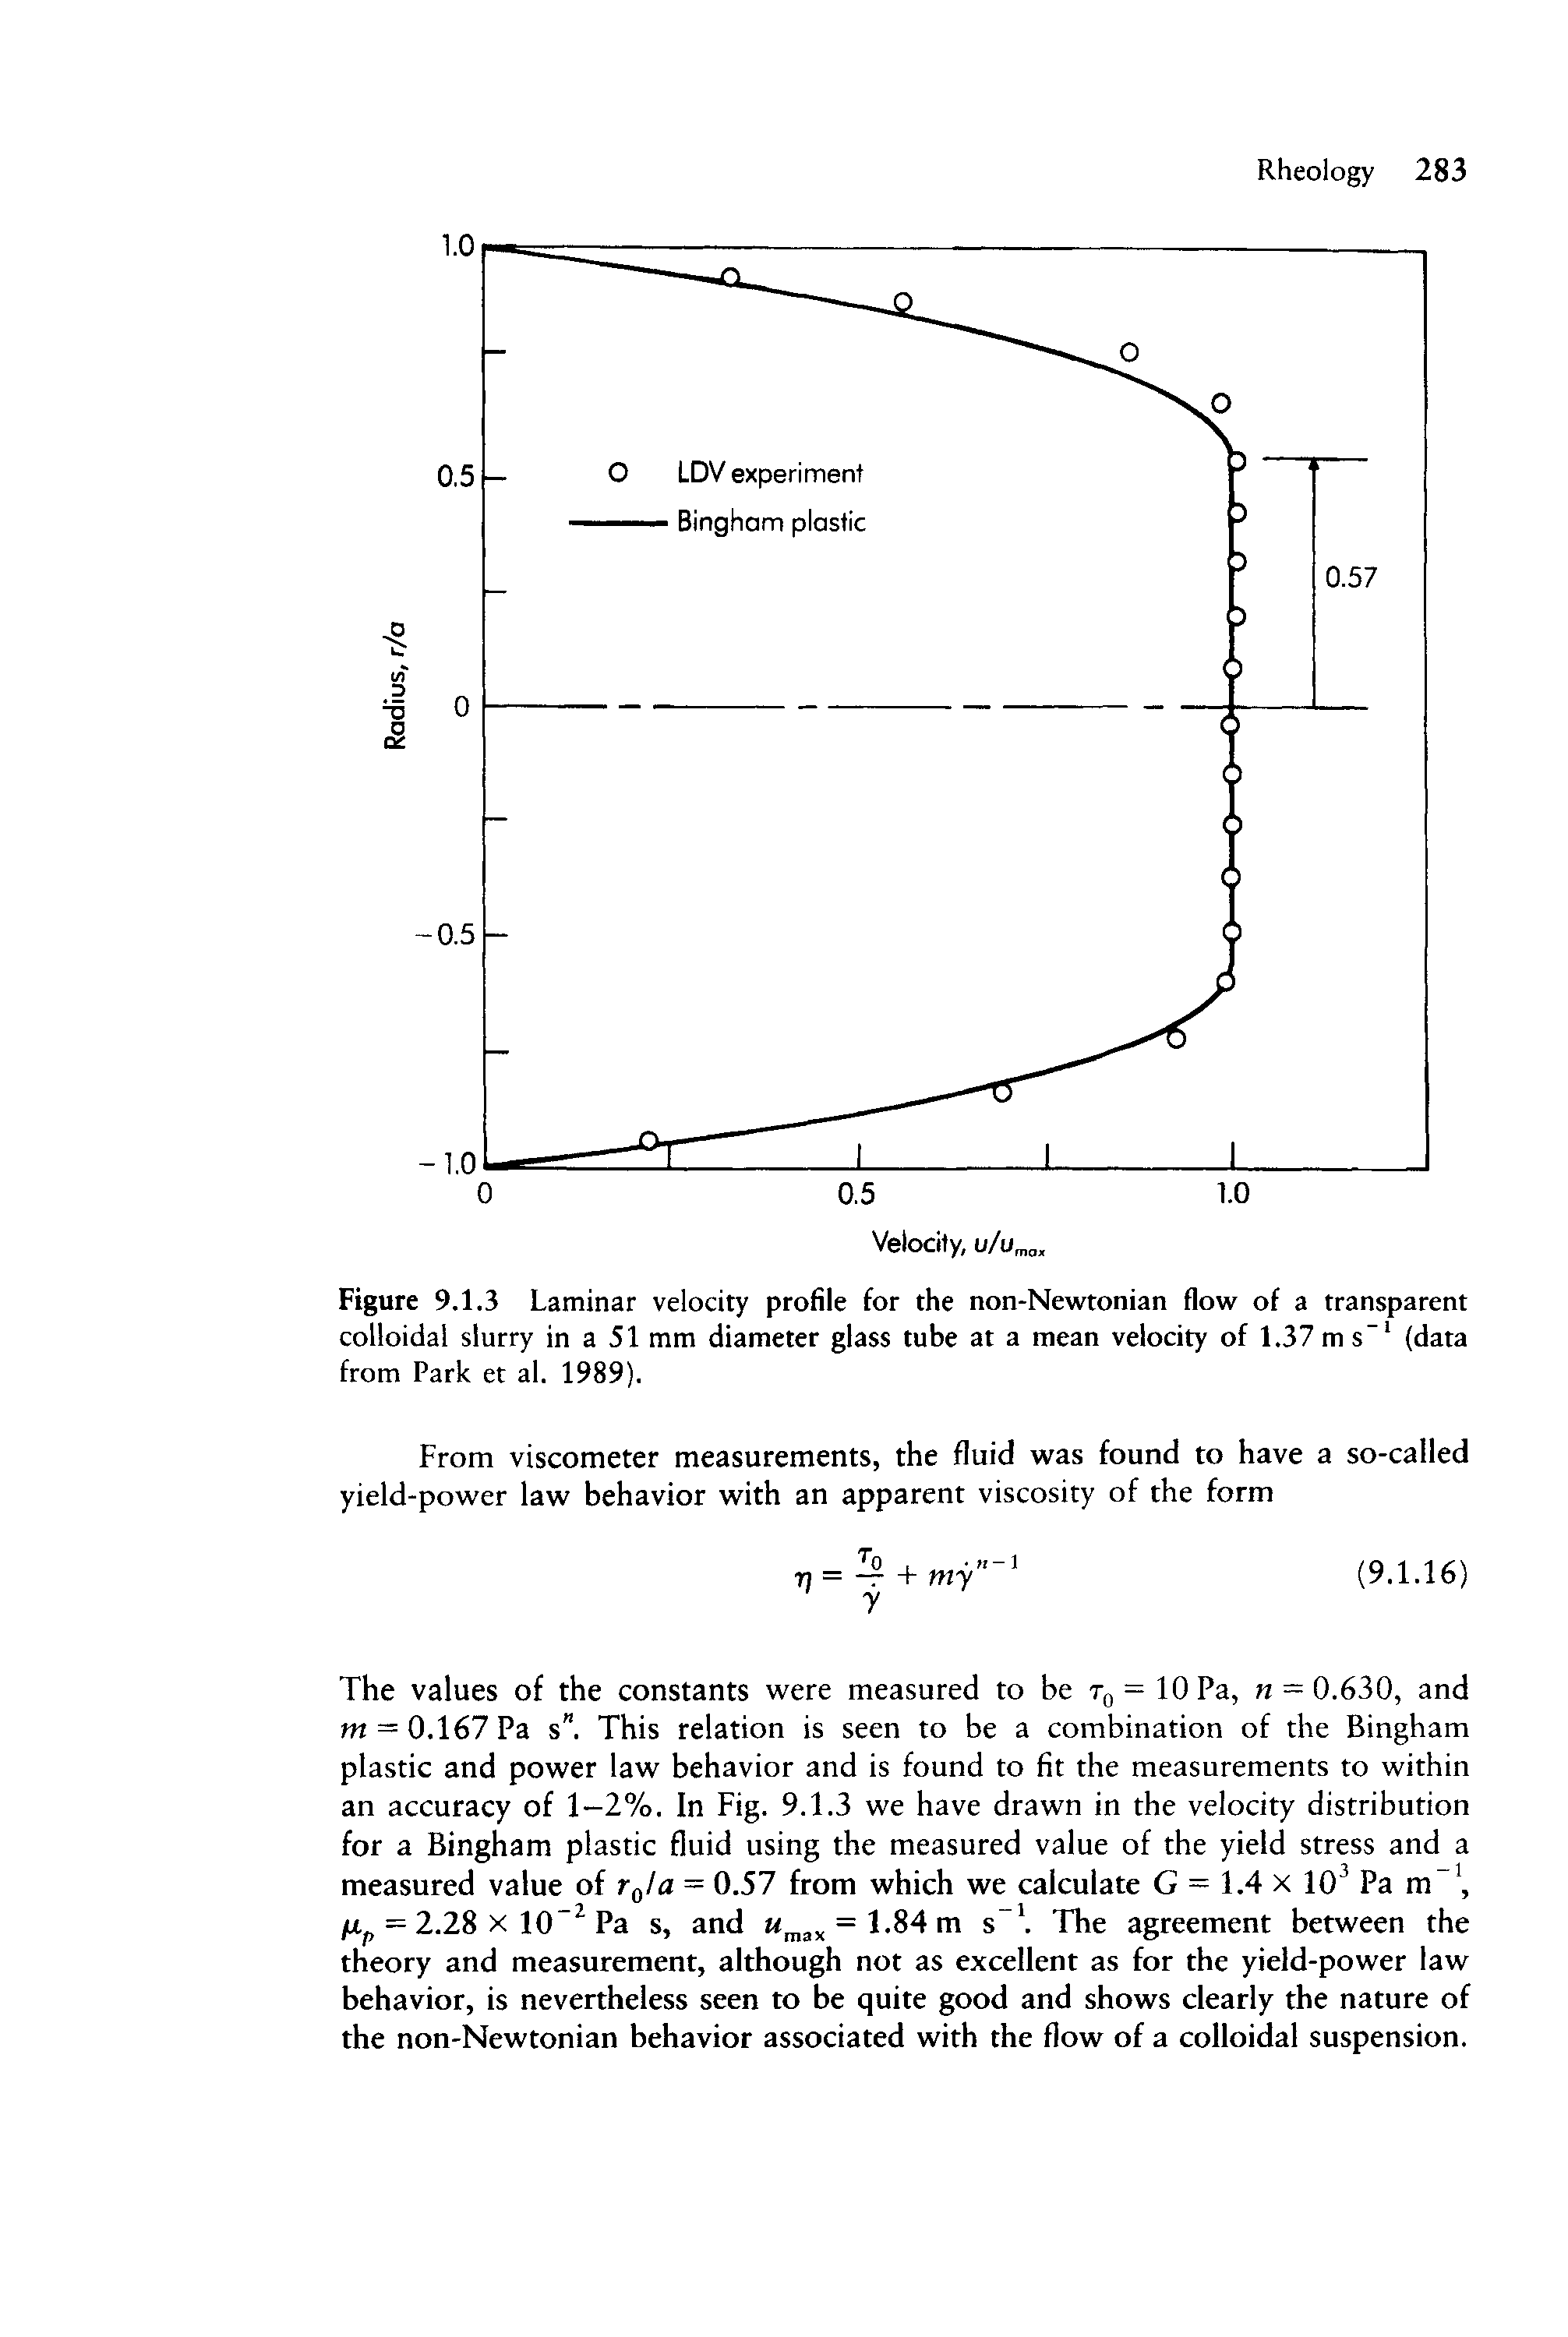 Figure 9.1.3 Laminar velocity profile for the non-Newtonian flow of a transparent colloidal slurry in a 51 mm diameter glass tube at a mean velocity of 1.37 ms (data from Park et al. 1989).